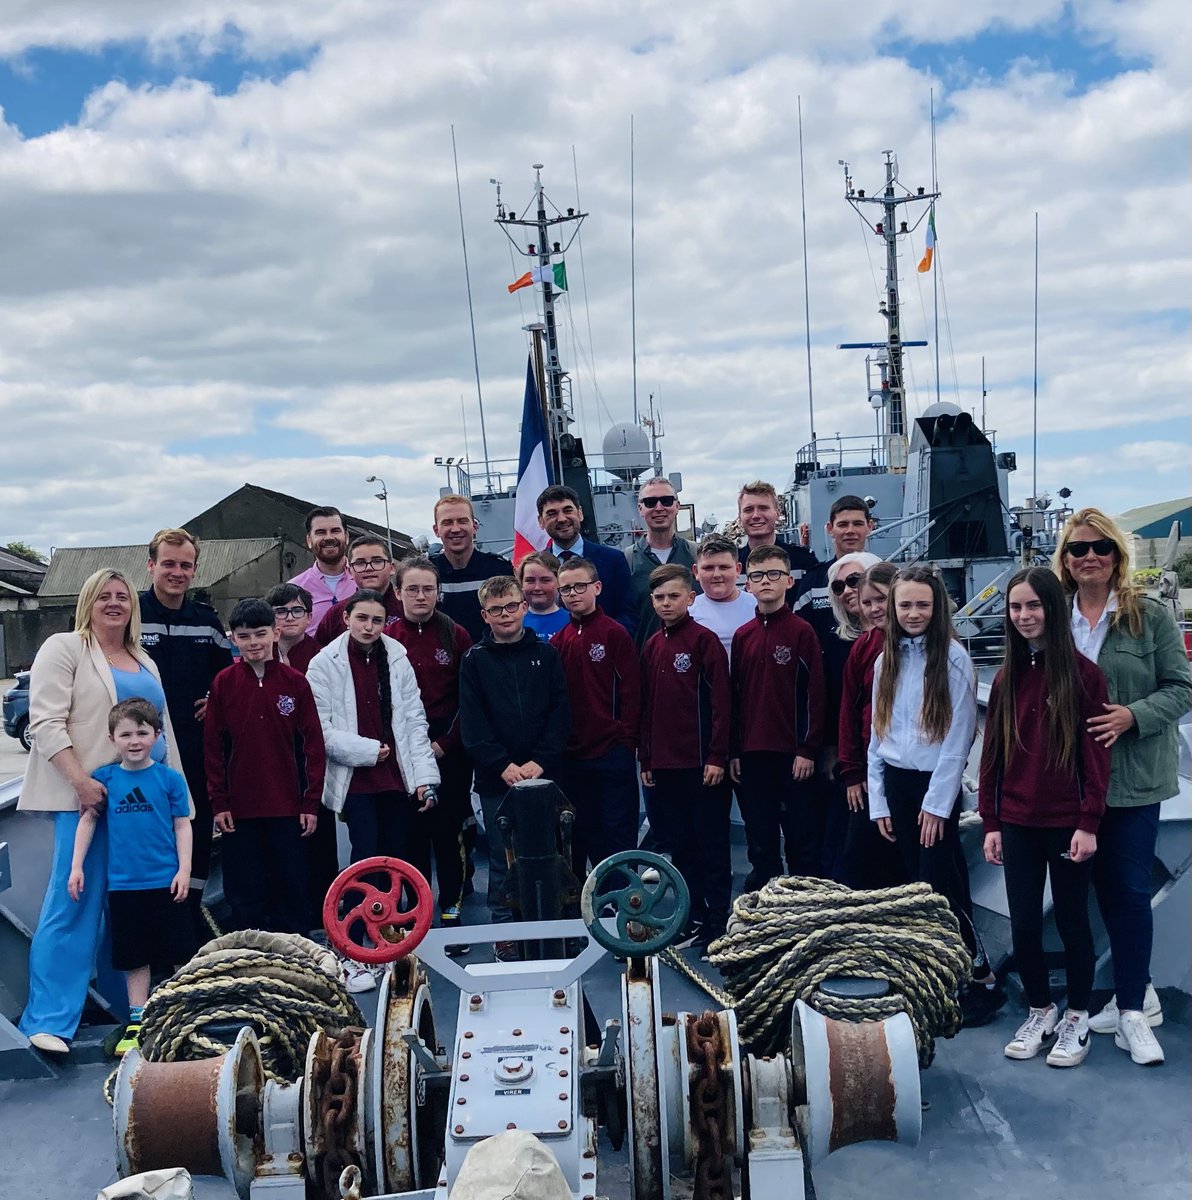 Last year pupils from @CMoyross made a award-winning film about the Flight of the Wild Geese. Today they got to live history by visiting the ships from the largest French fleet to sail to Limerick since 1691! As @PresidentIRL told them “[History] is a living breathing narrative”